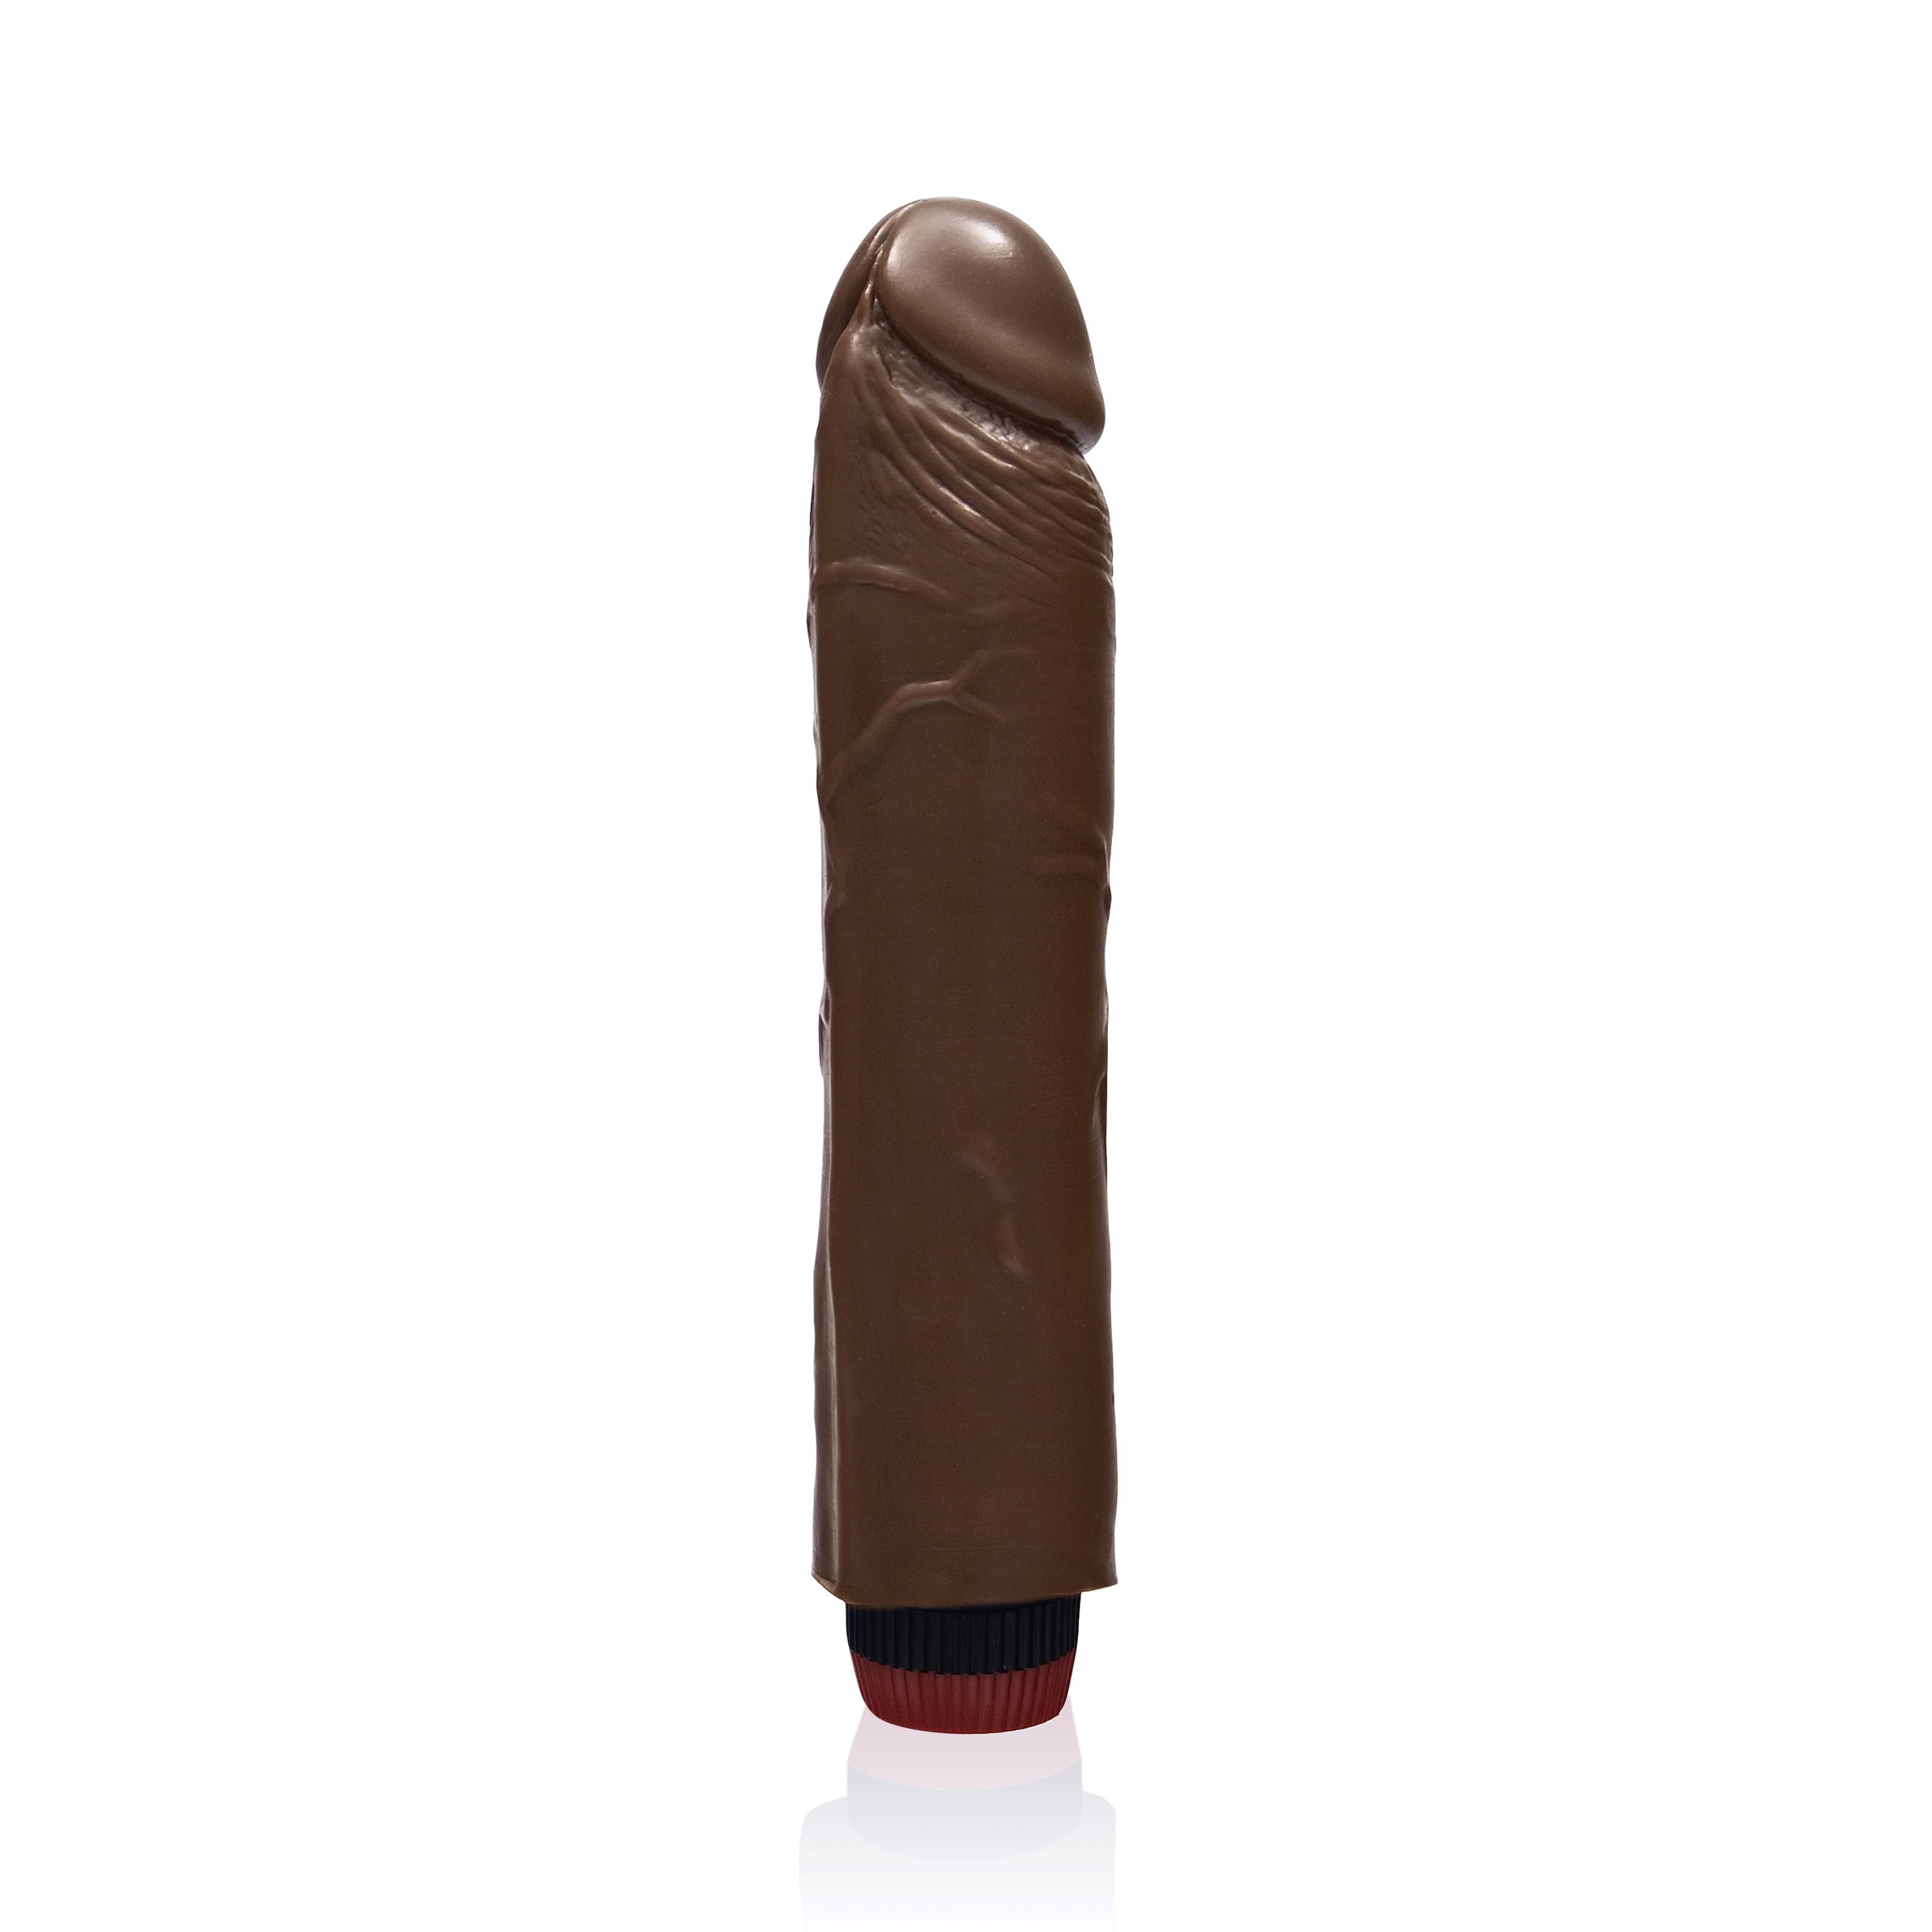 SI IGNITE Cock Dong with Vibration, Brown, 23 cm